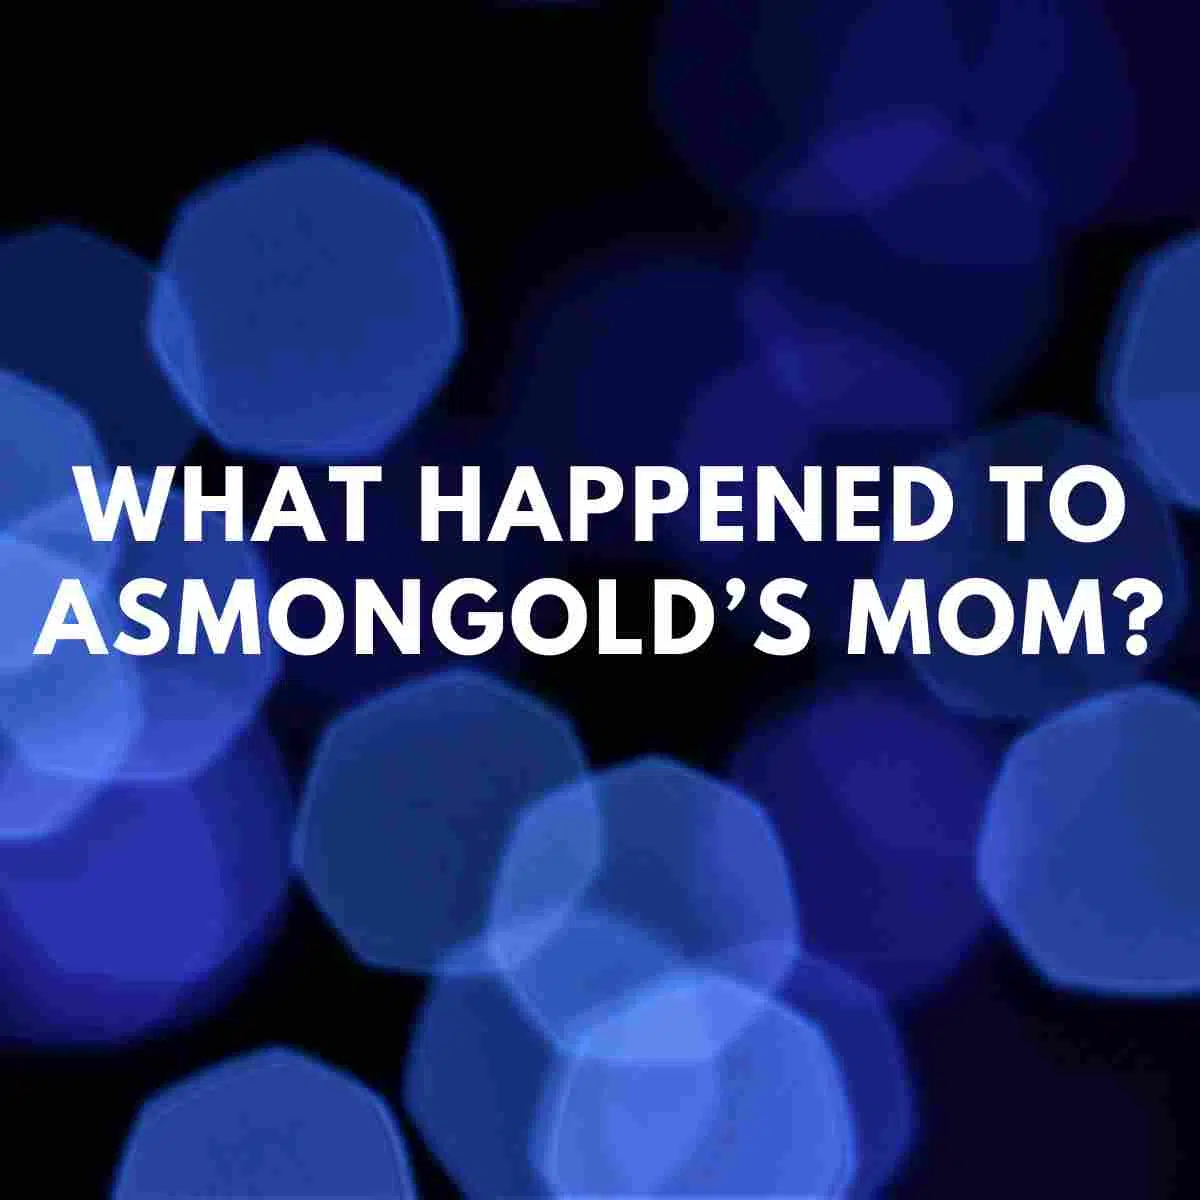 What happened to Asmongold’s mom